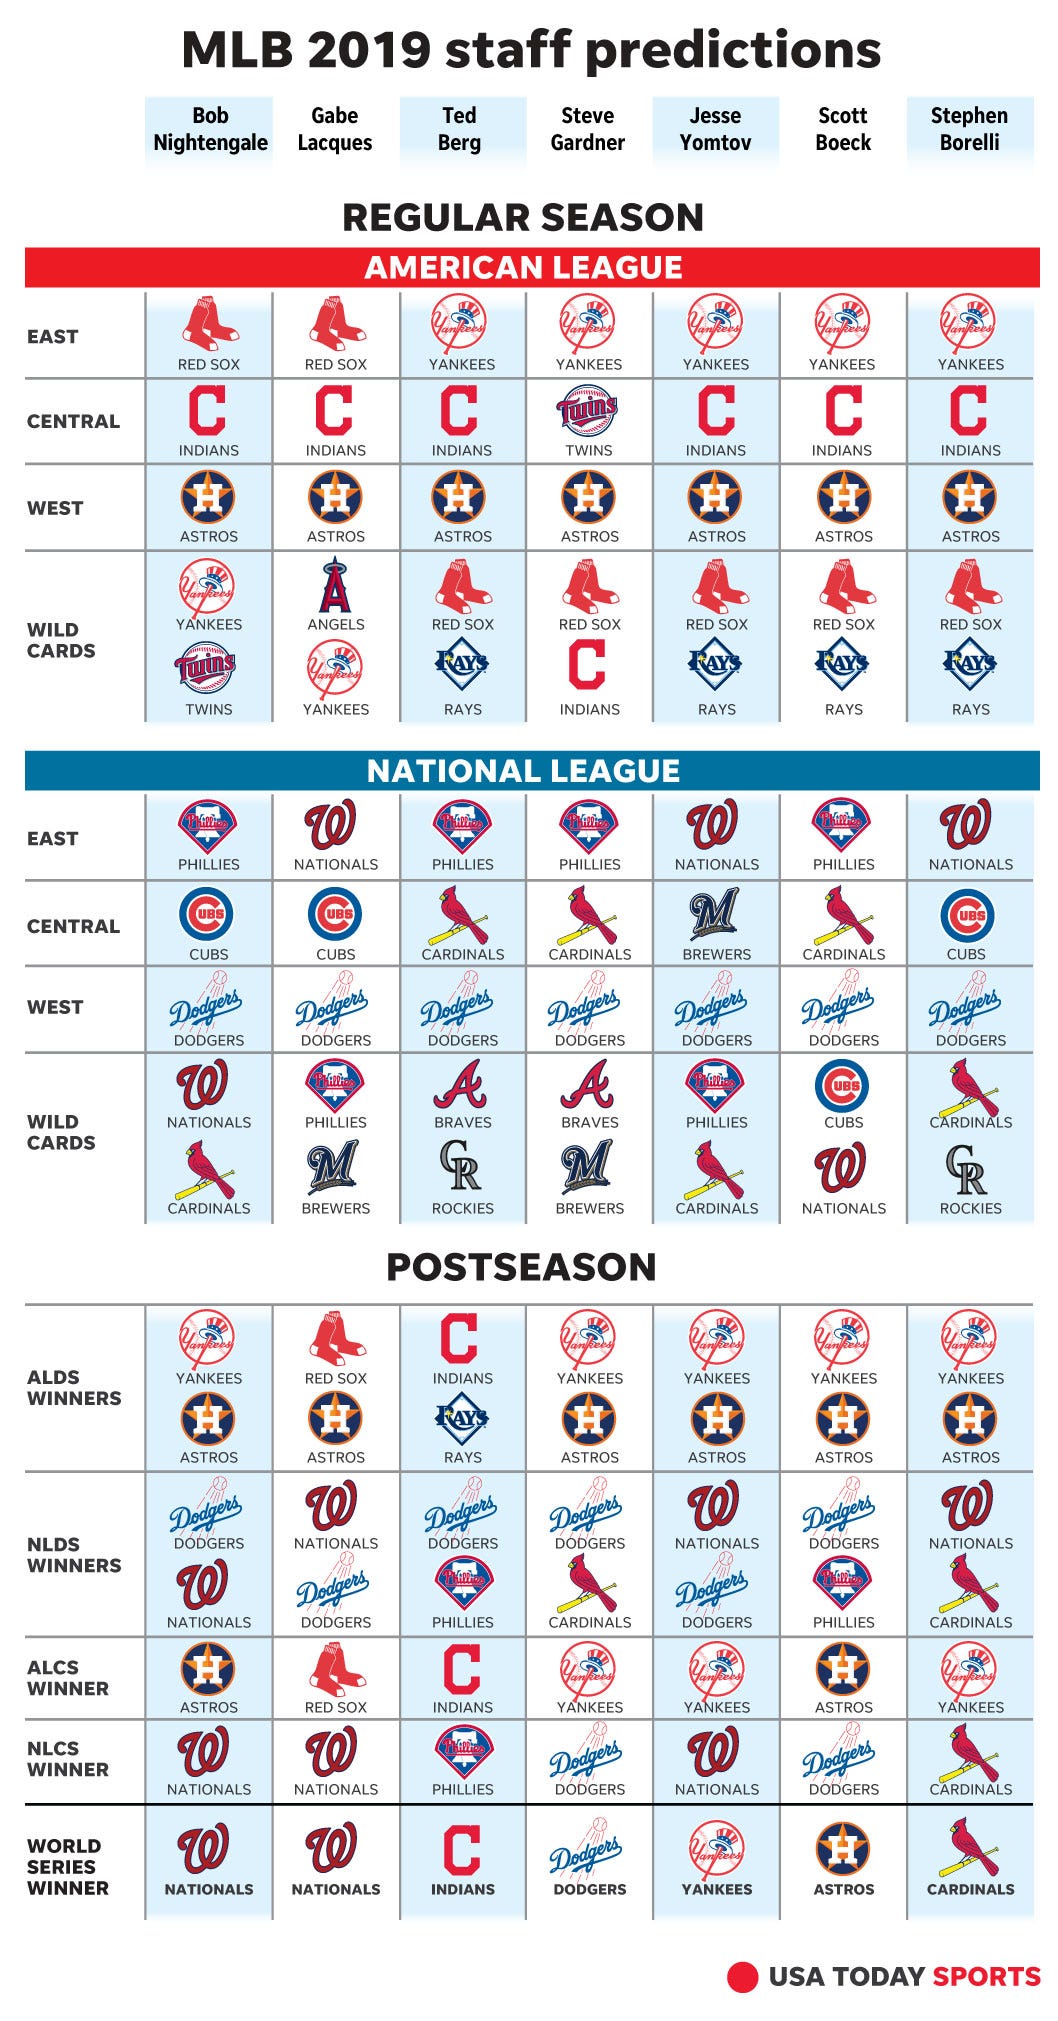 Ranking Every World Series Winner Since 2000  The Wright Way Network